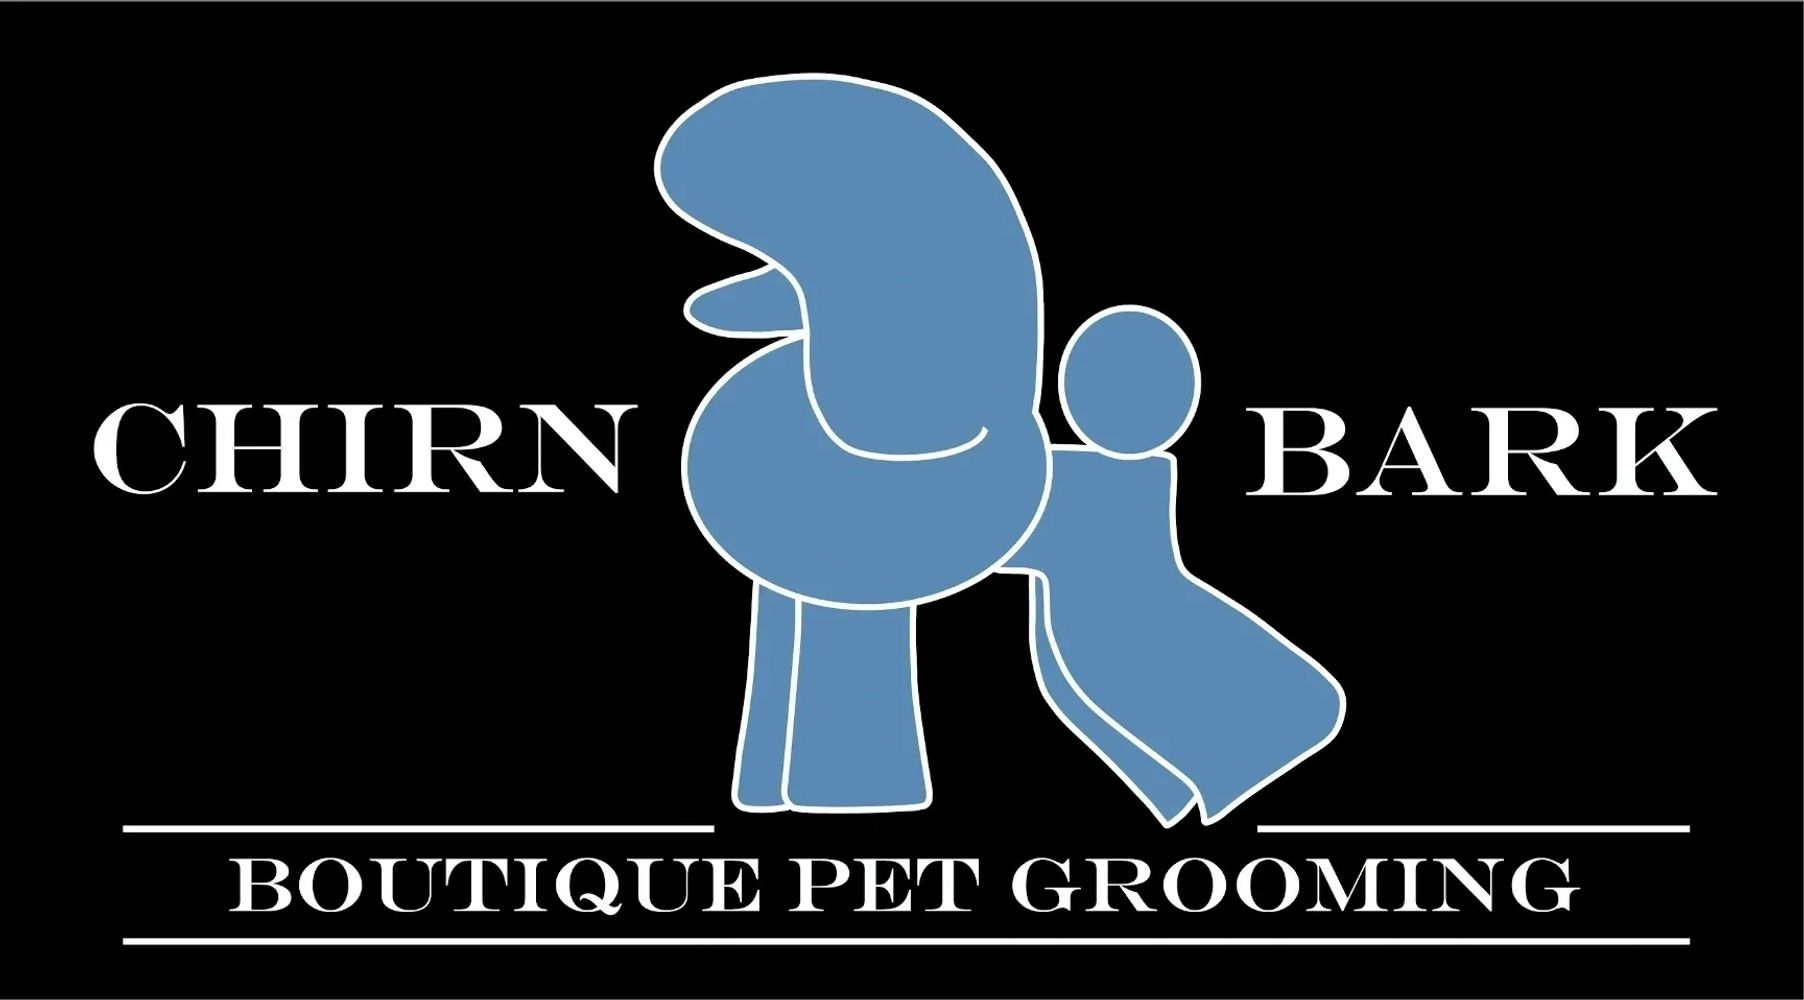 Chirn Bark Boutique Pet Grooming